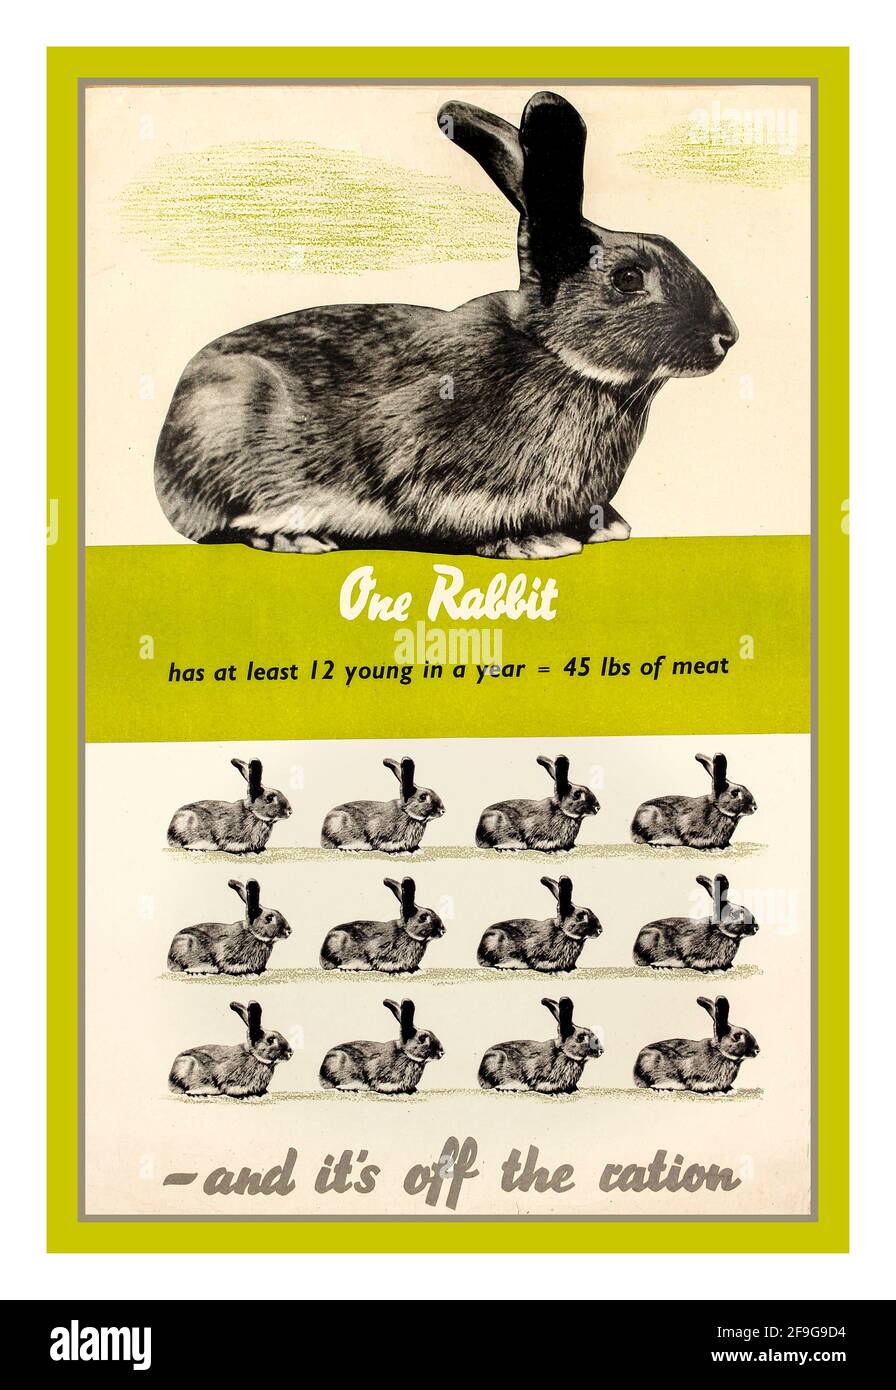 WW2 War UK British Propaganda  vintage food rationing poster ' One Rabbit and it's off the ration'. ' has at least 12 young in a year 45lbs of meat' Country: UK. Year: 1940s  World War II Second World War Stock Photo